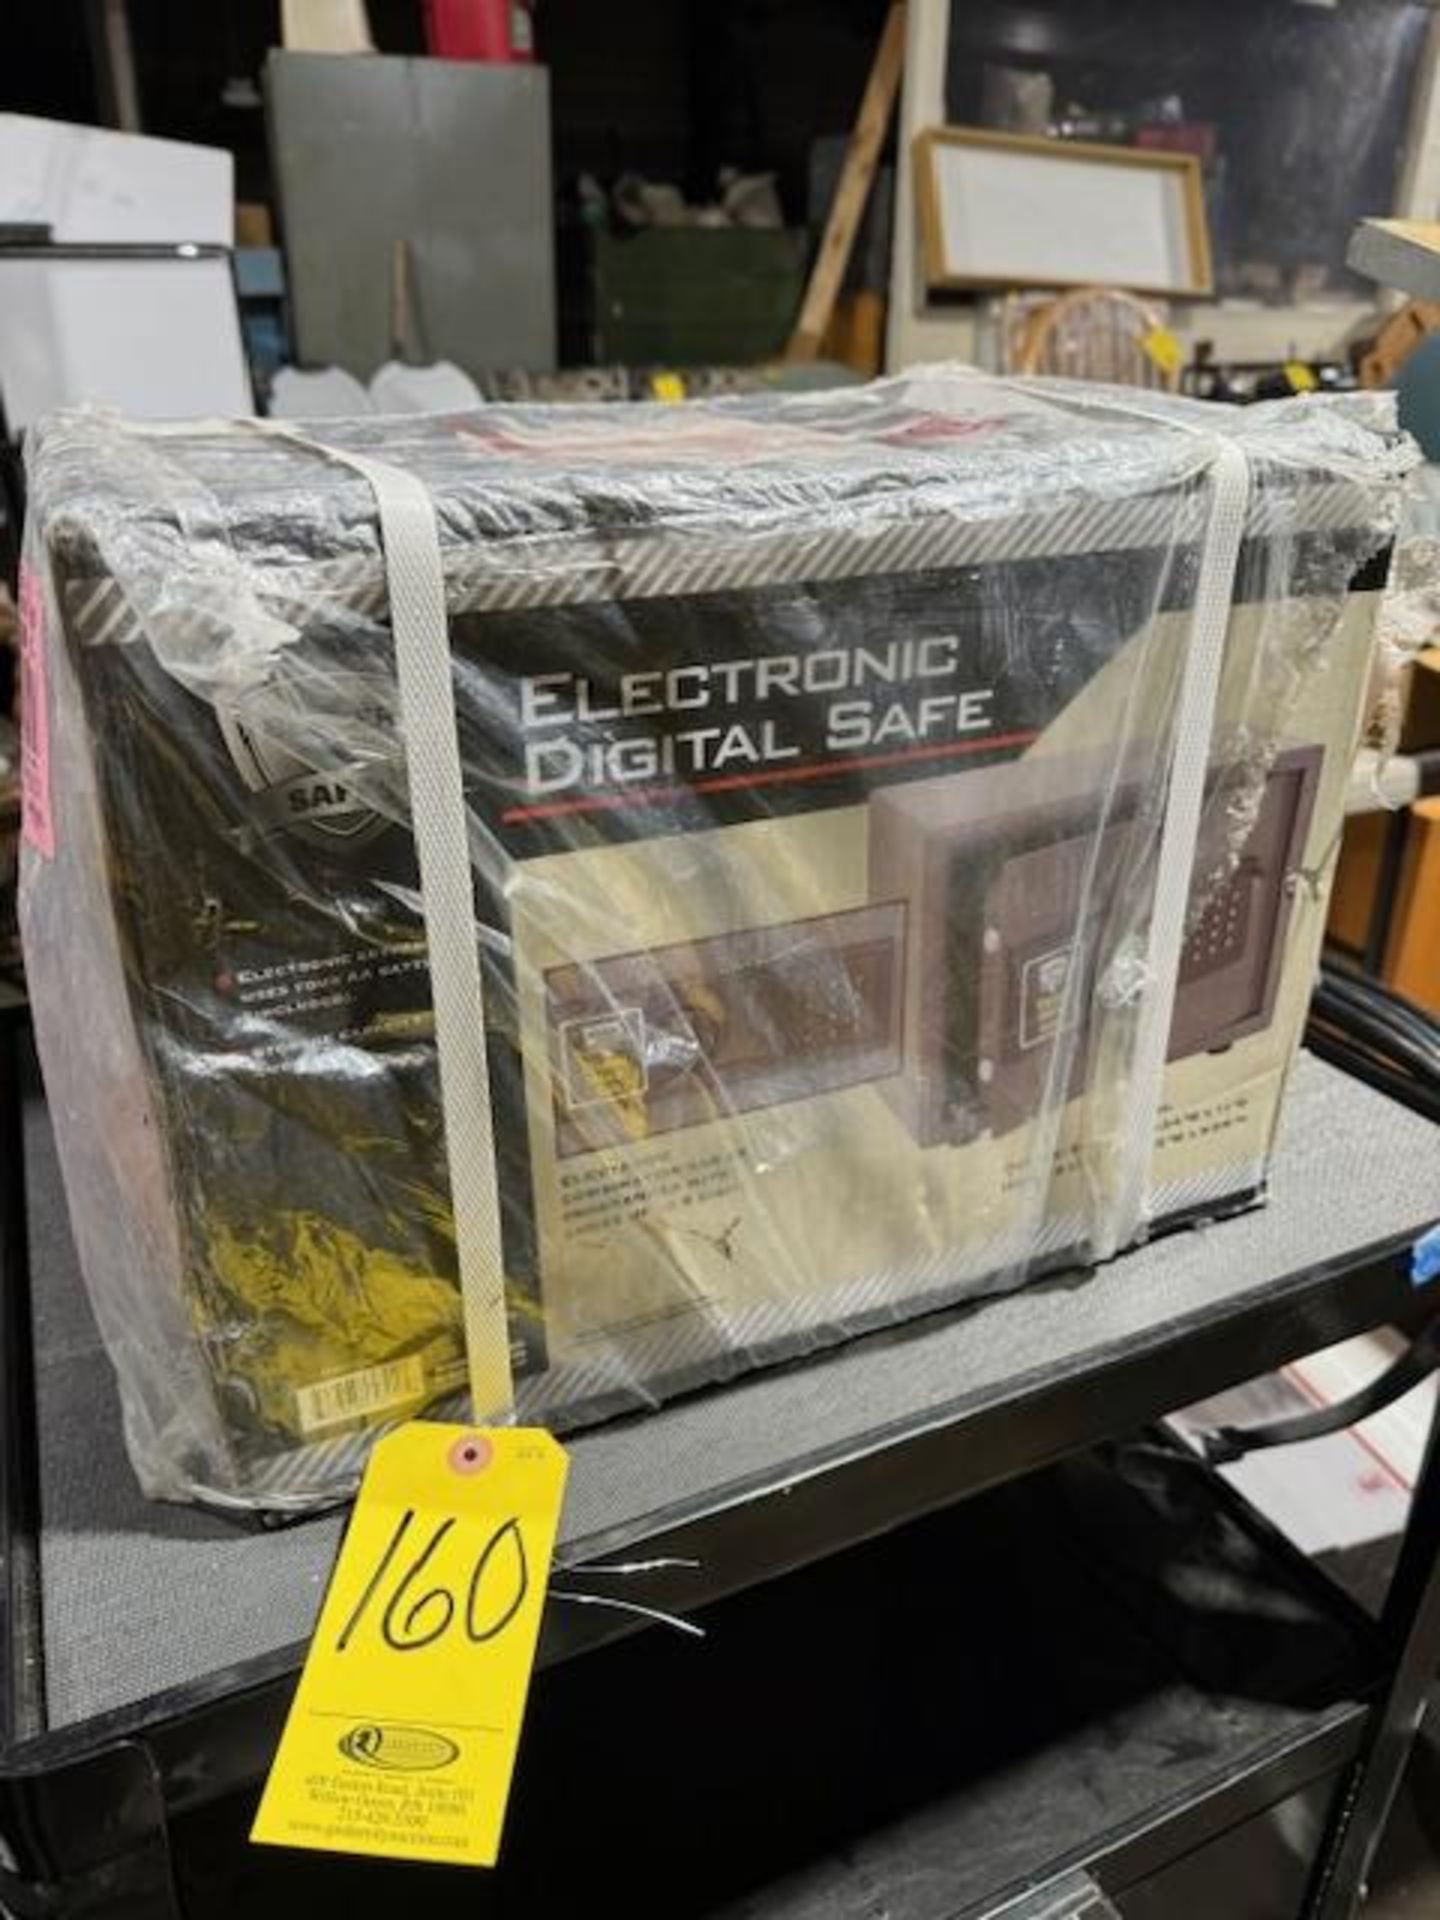 NEW ELECTRONIC DIGITAL SAFE (Located in Southampton, PA)